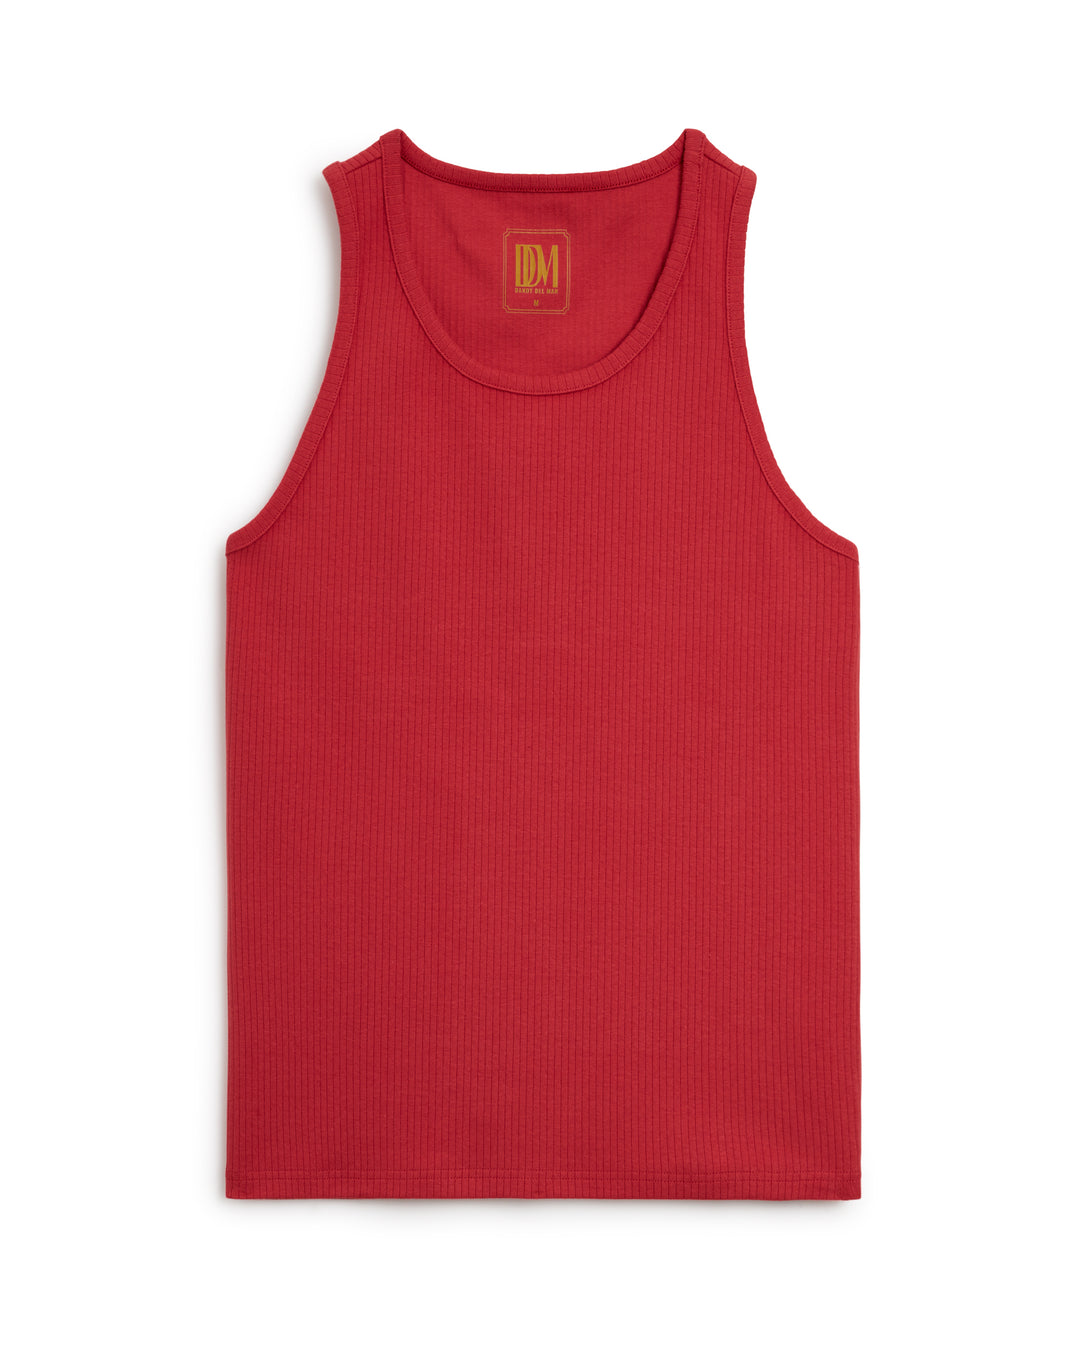 The Dandy Del Mar Milan Rib Tank - Currant on a white background.